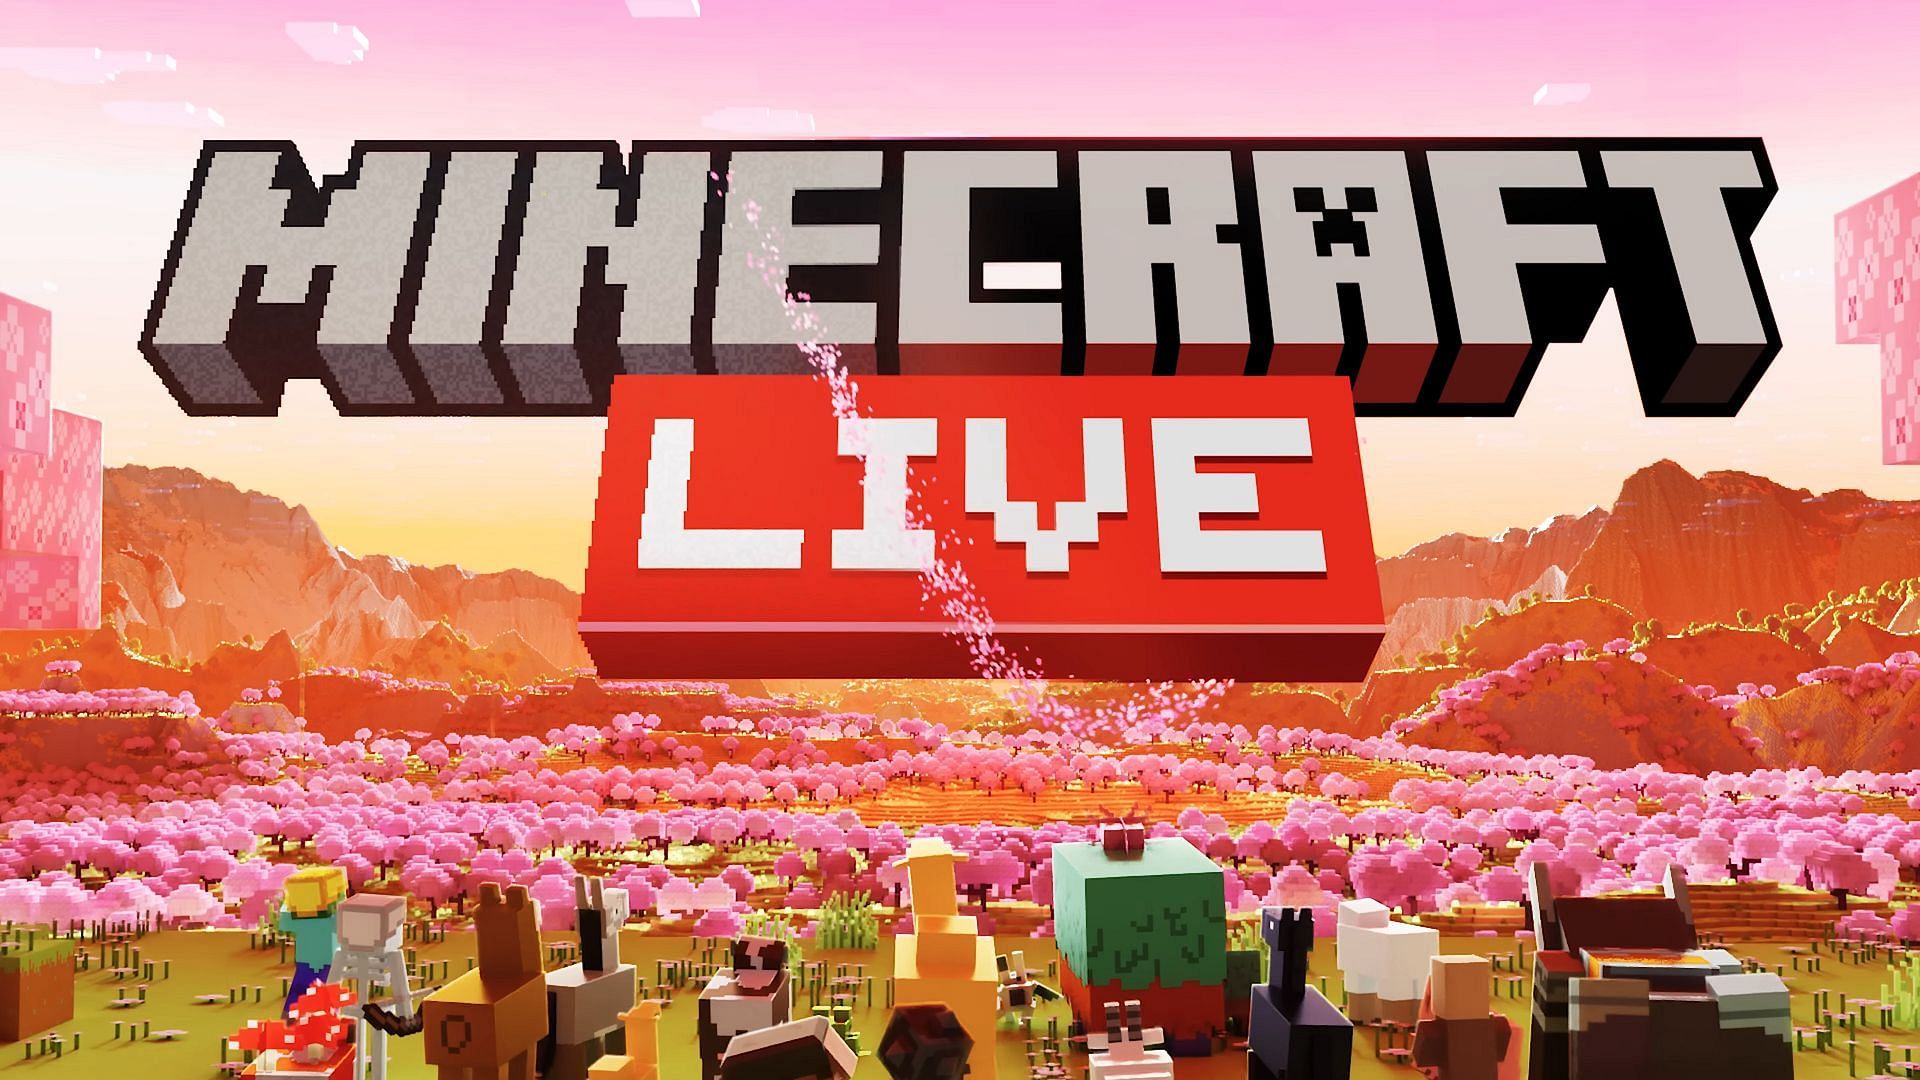 Live wallpaper Chika and bedrock in minecraft DOWNLOAD